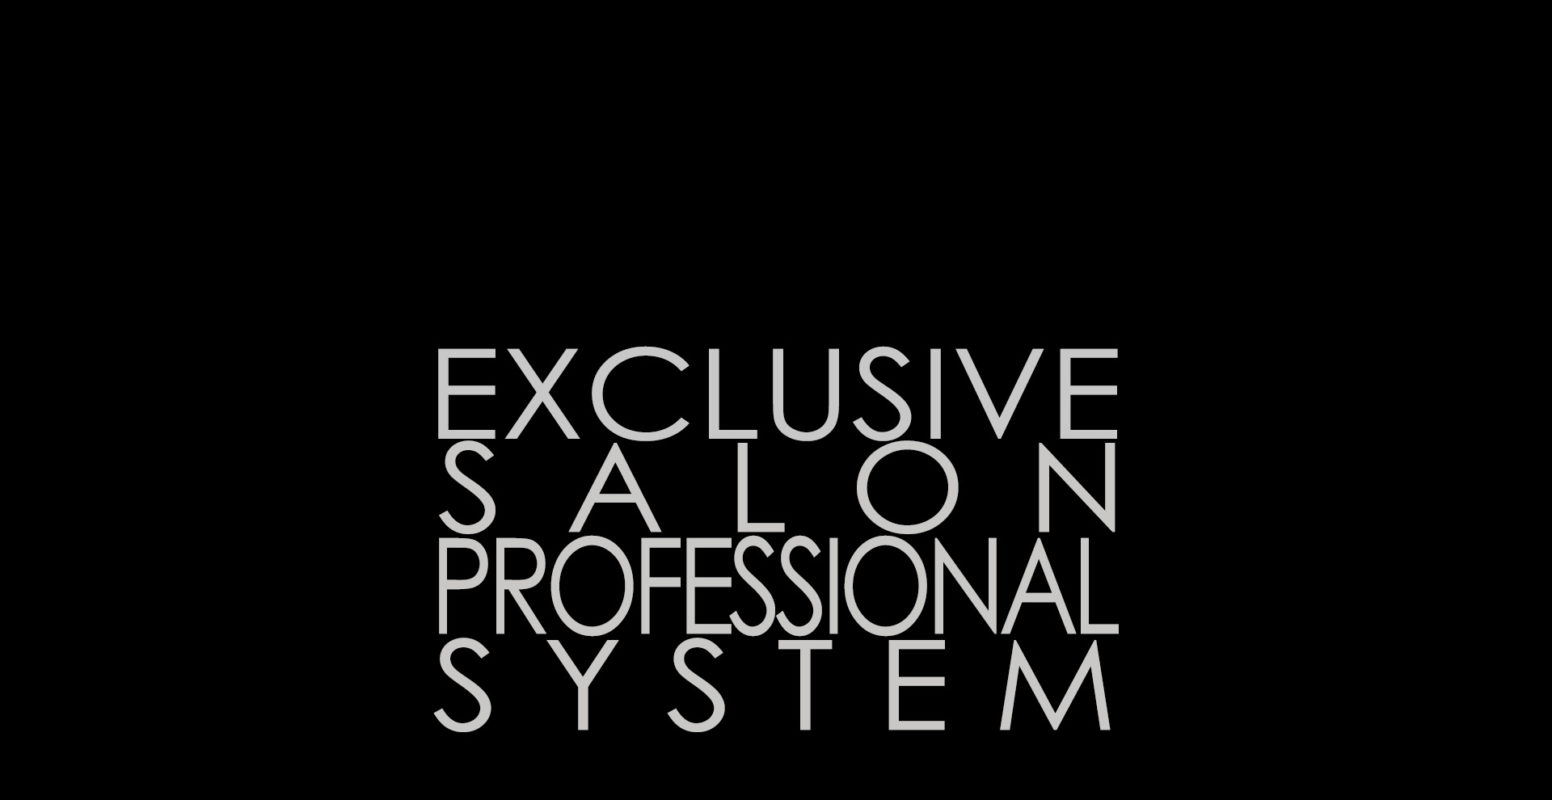 EXCLUSIVE SALON PROFESSIONAL SYSTEM - Only on the best hair salons